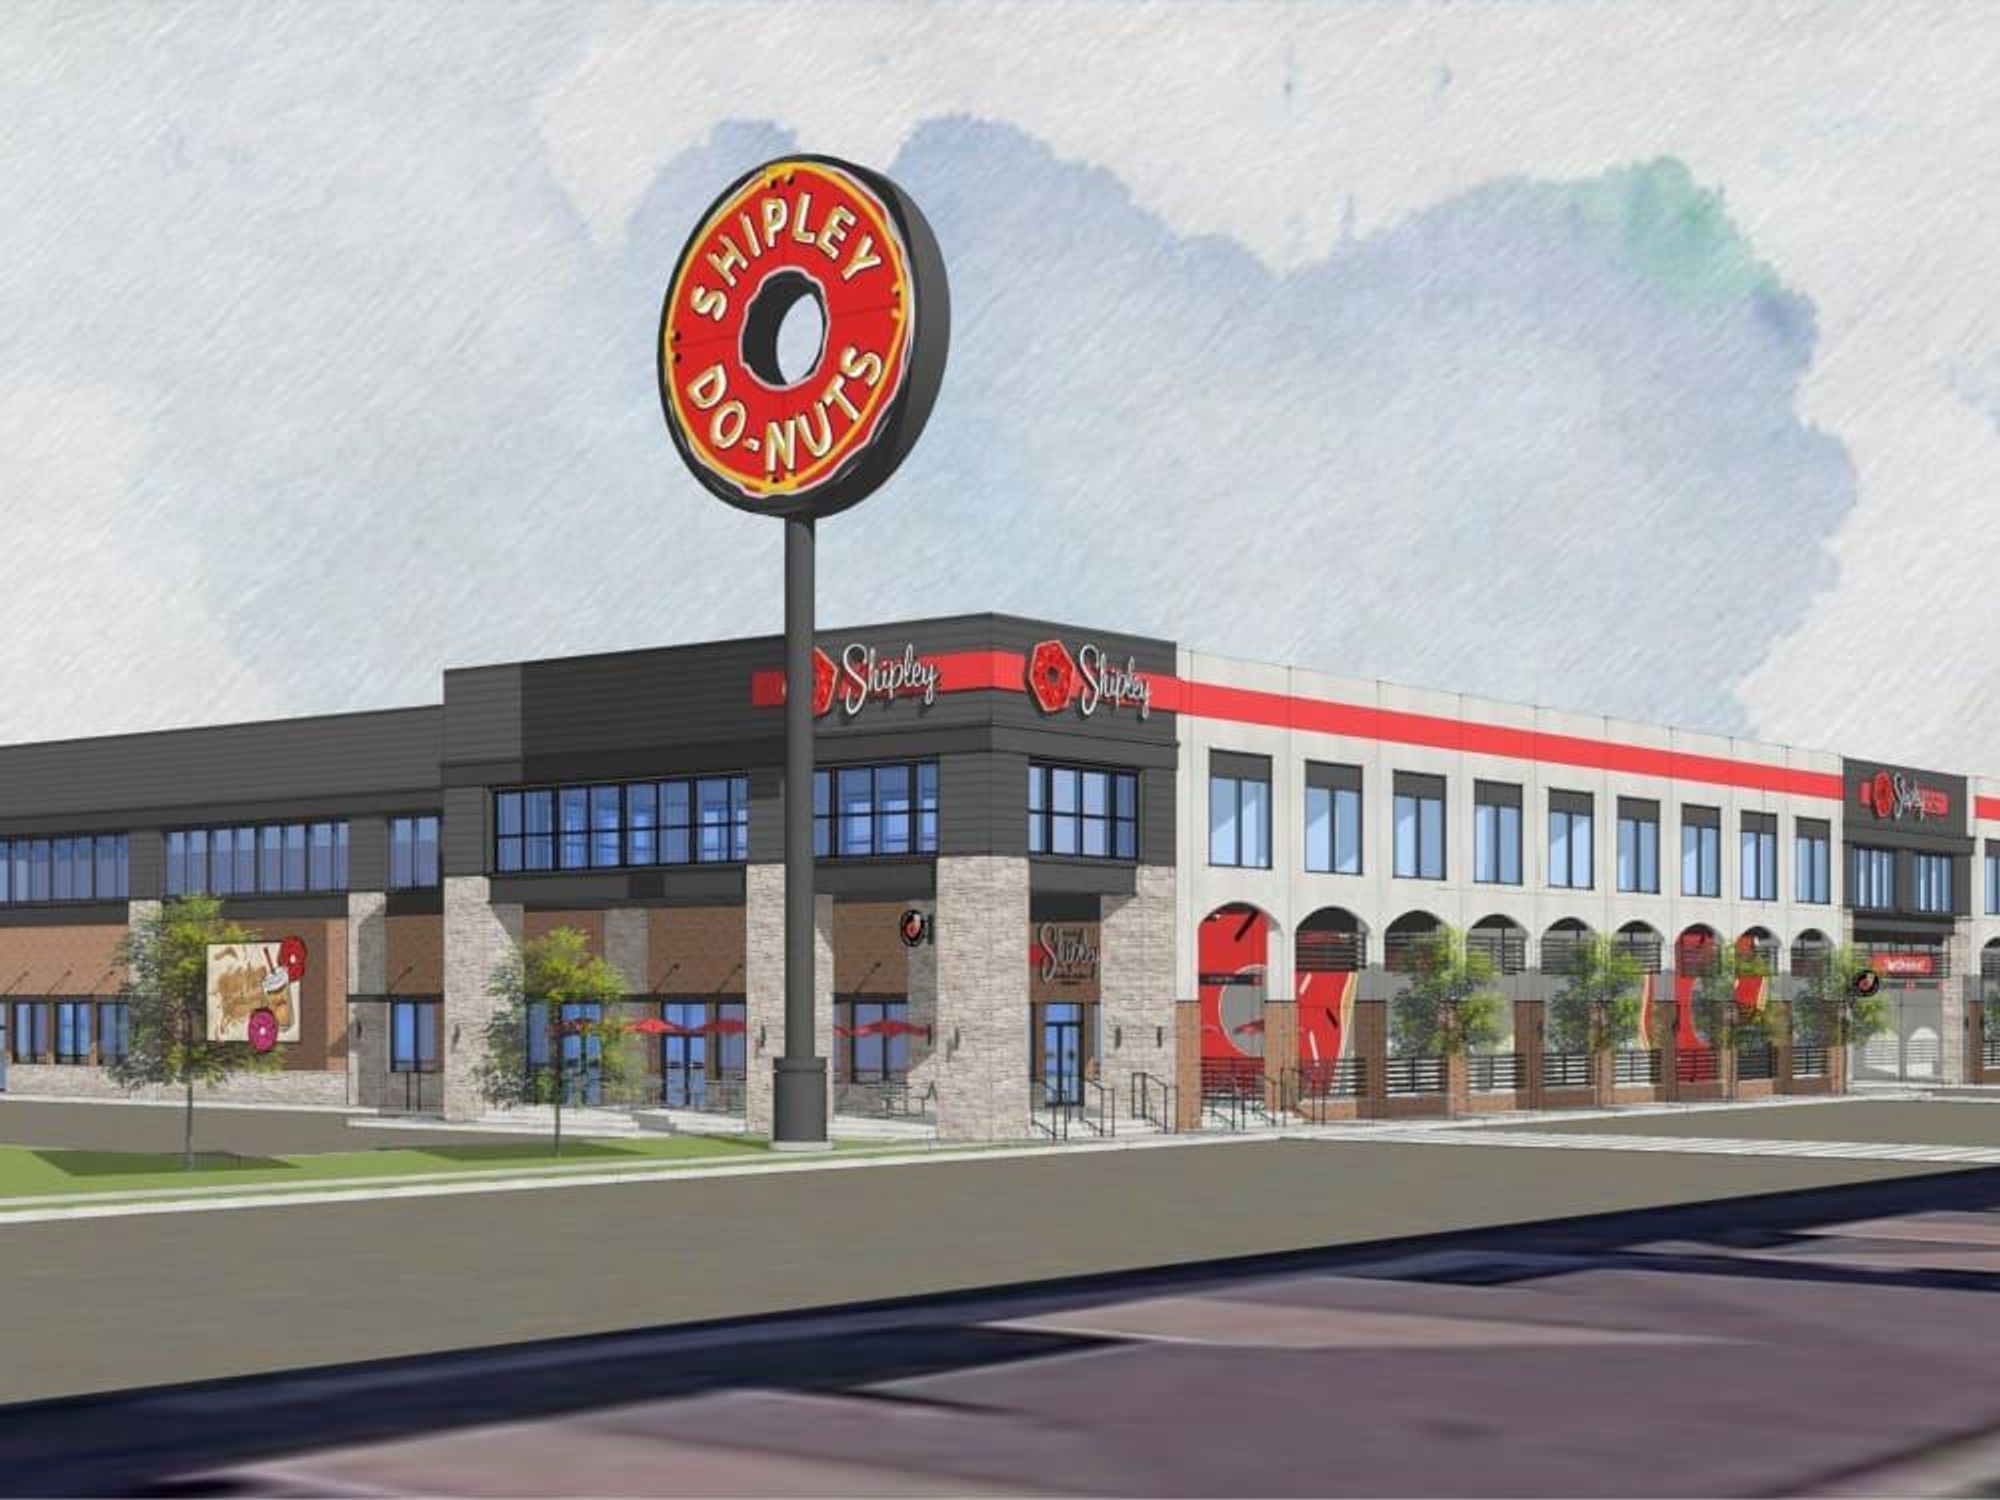 Shipley Do-Nuts corporate headquarters rendering